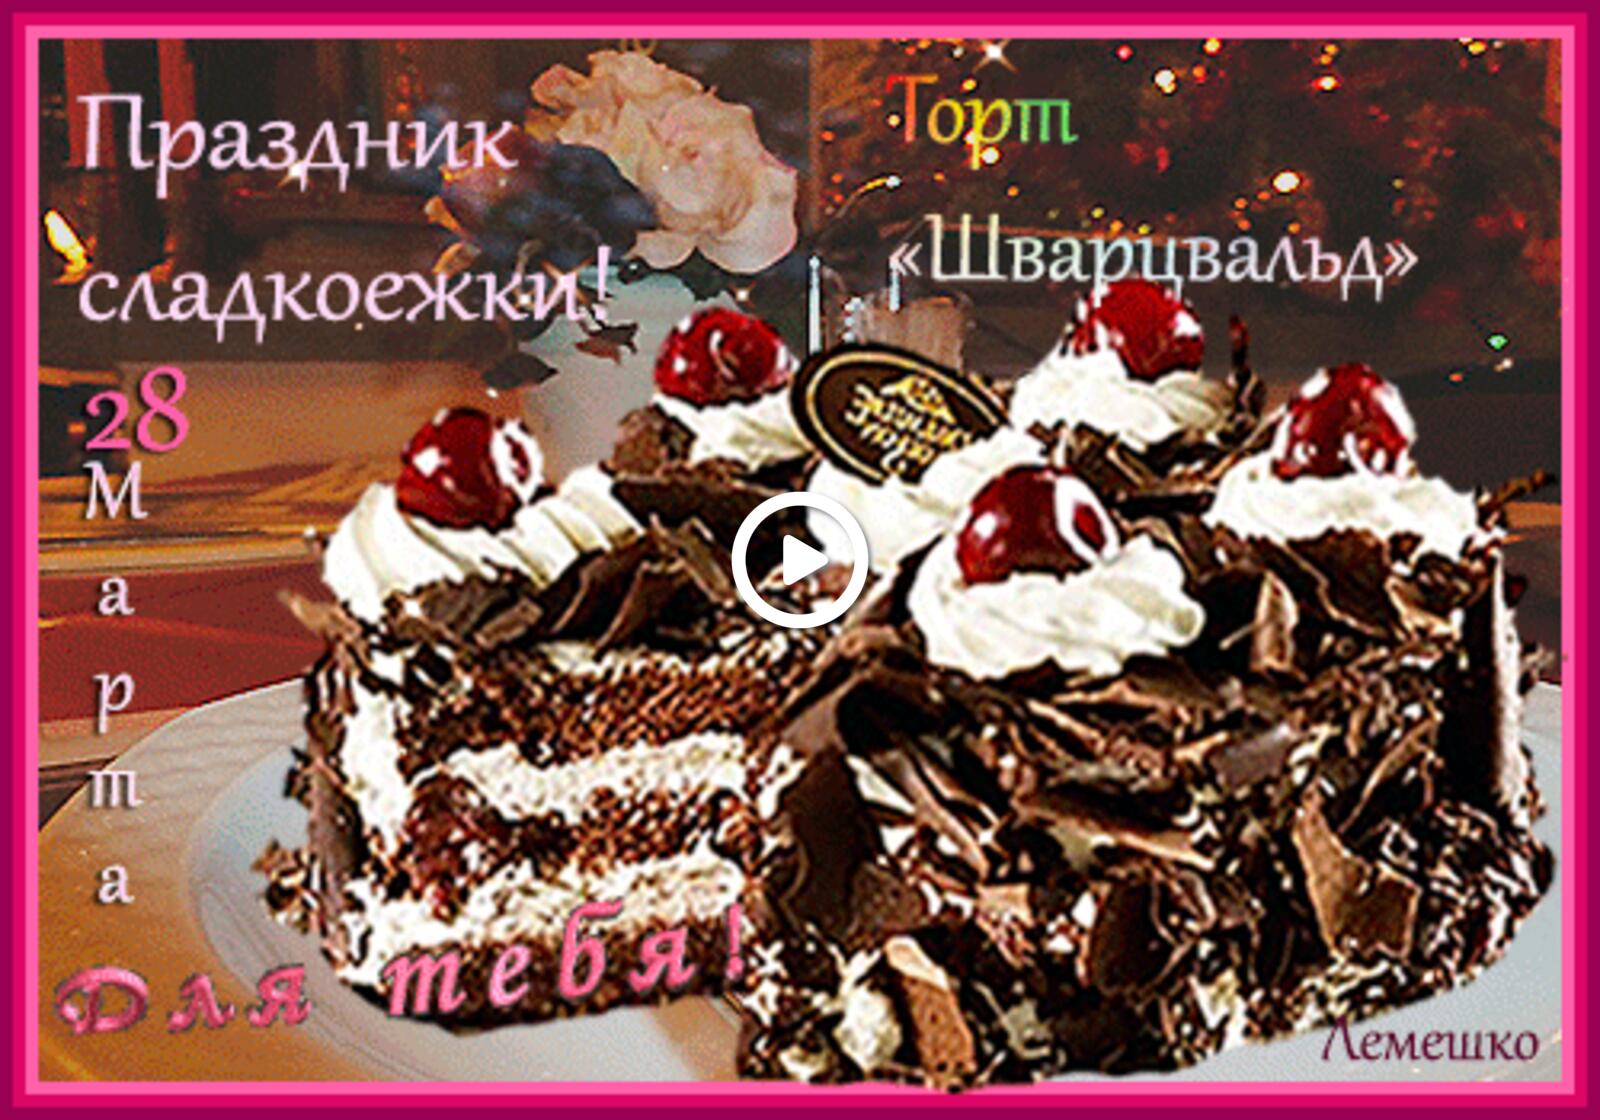 A postcard on the subject of have a nice sunday afternoon sweet life hyphae food for free